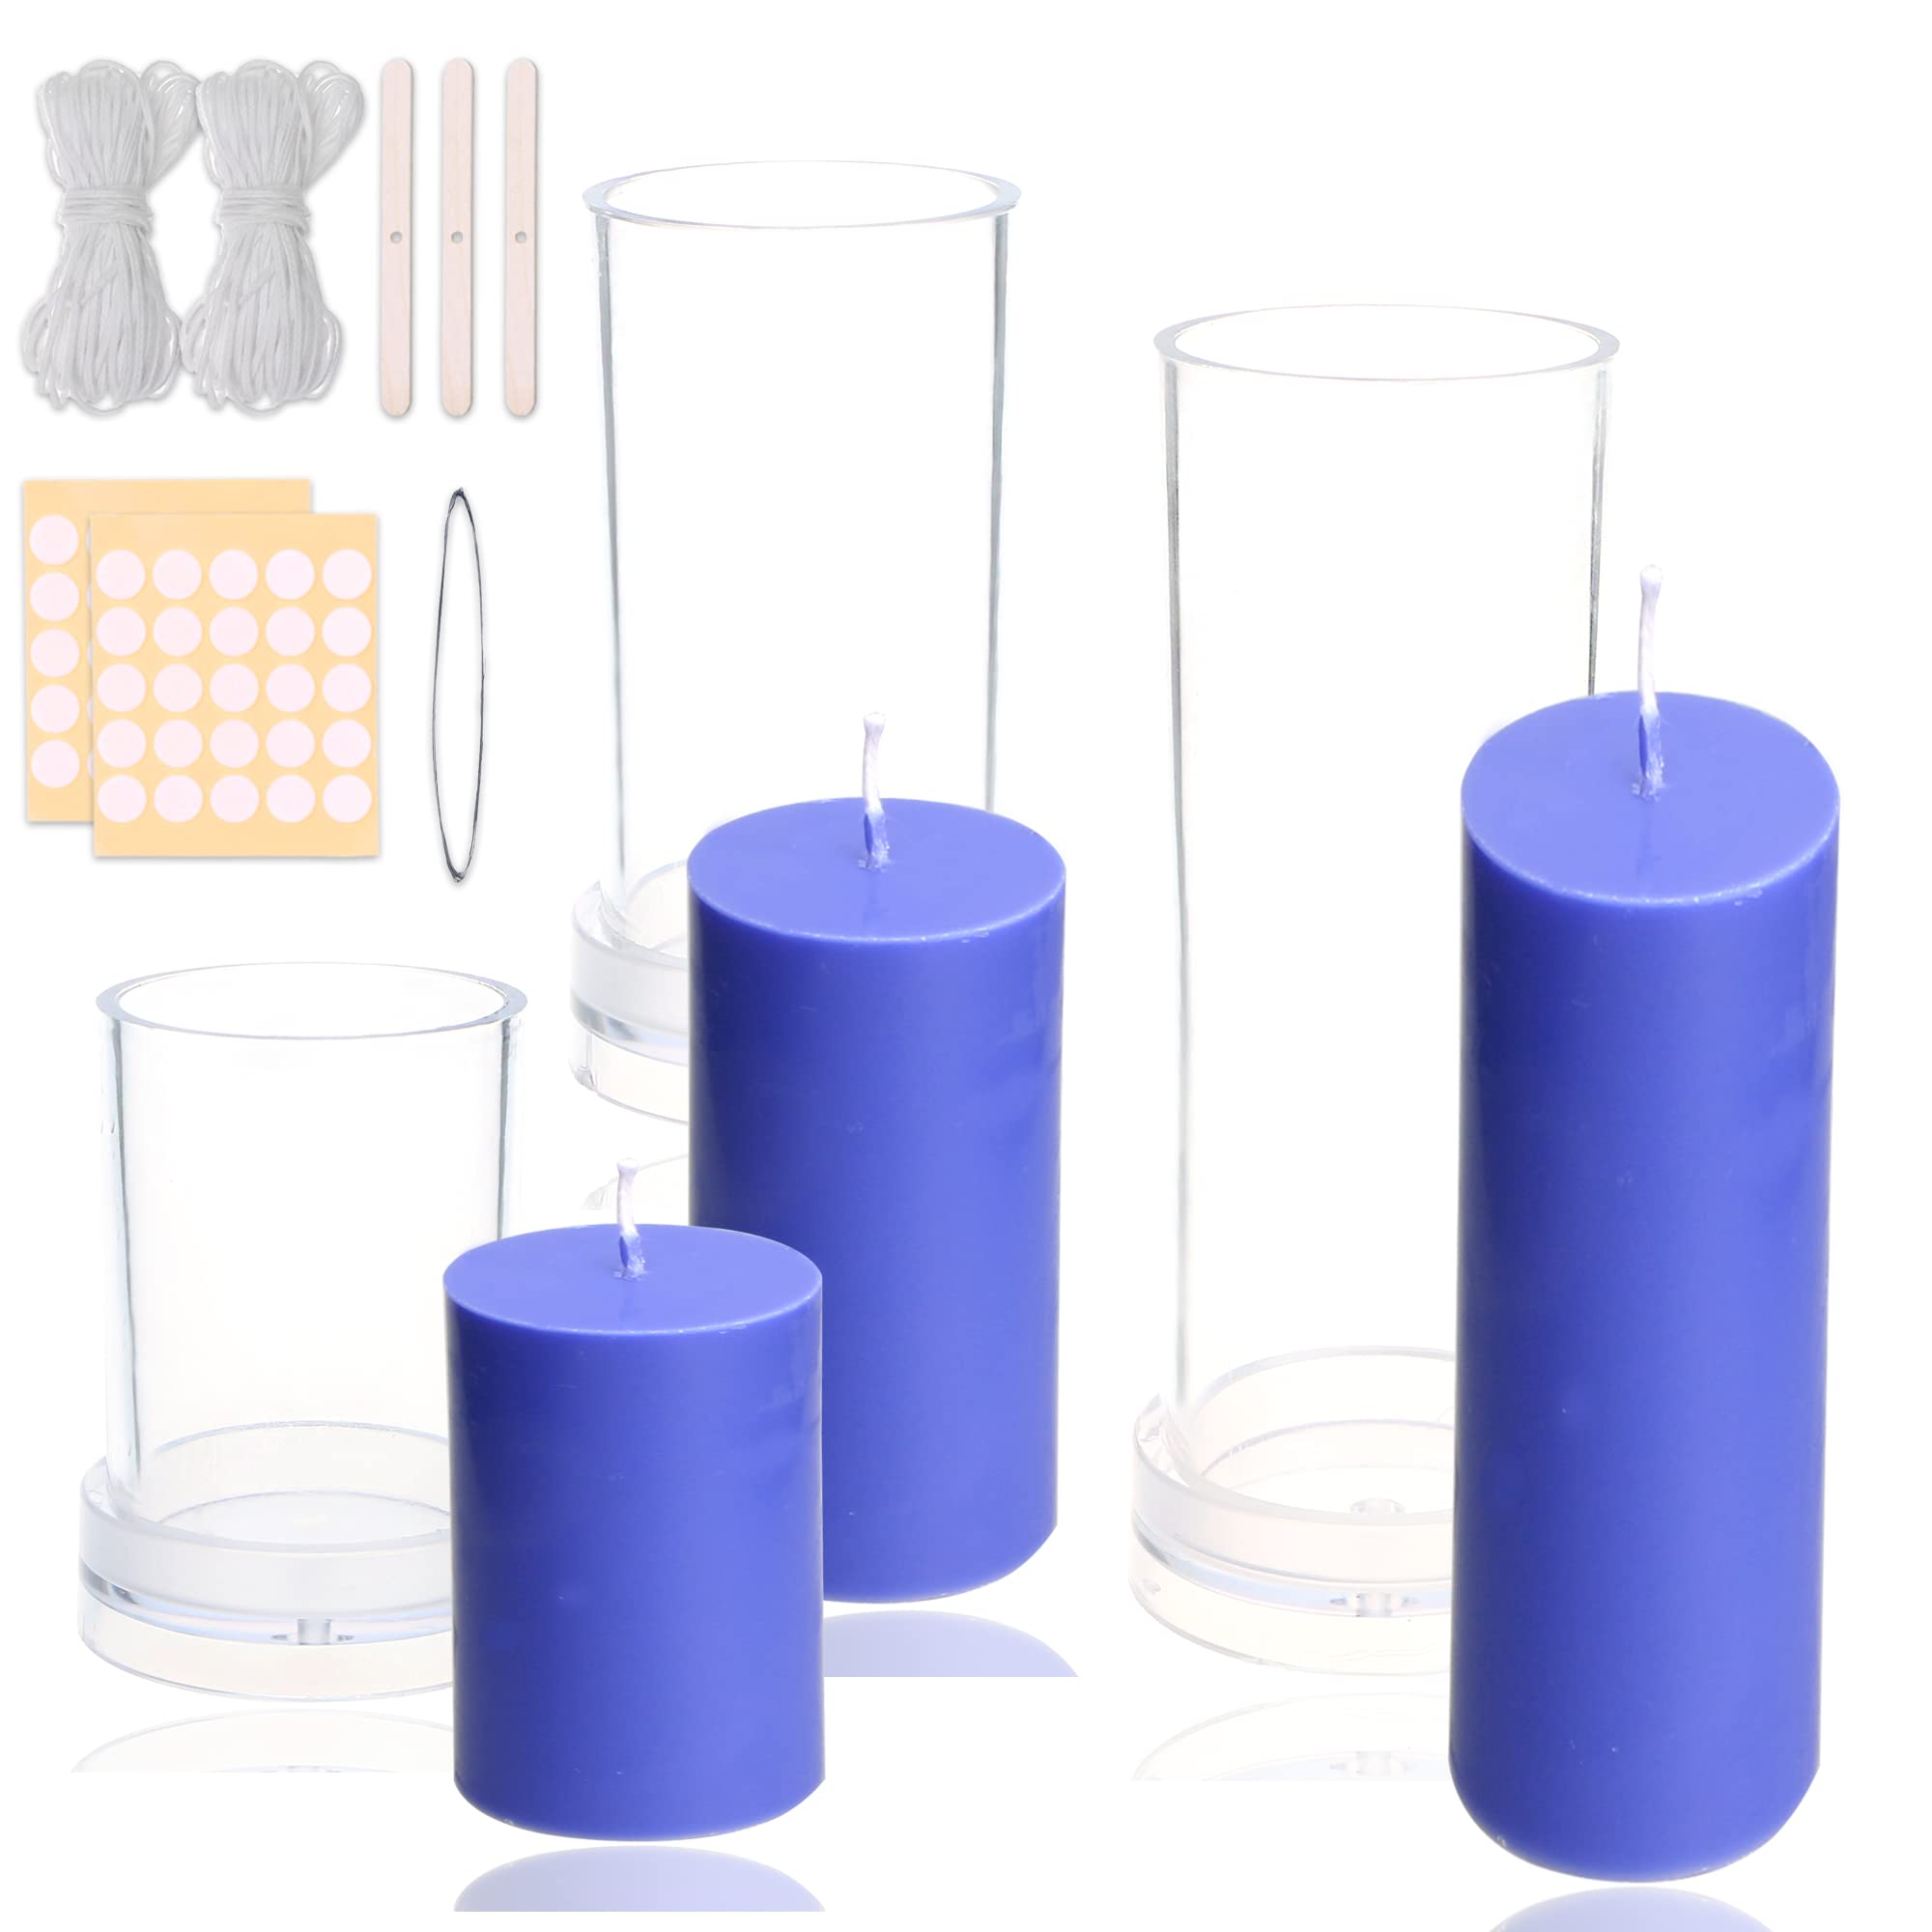 MILIVIXAY 3PCS Pillar Candle Molds - Plastic Cylinder Candle Mold Set for  Candle Making-Candle Making Molds-60 Ft. of Wick, 50pcs Wick Stickers, 3pcs  Wick Holders and 1pc Iron Wire Included as a